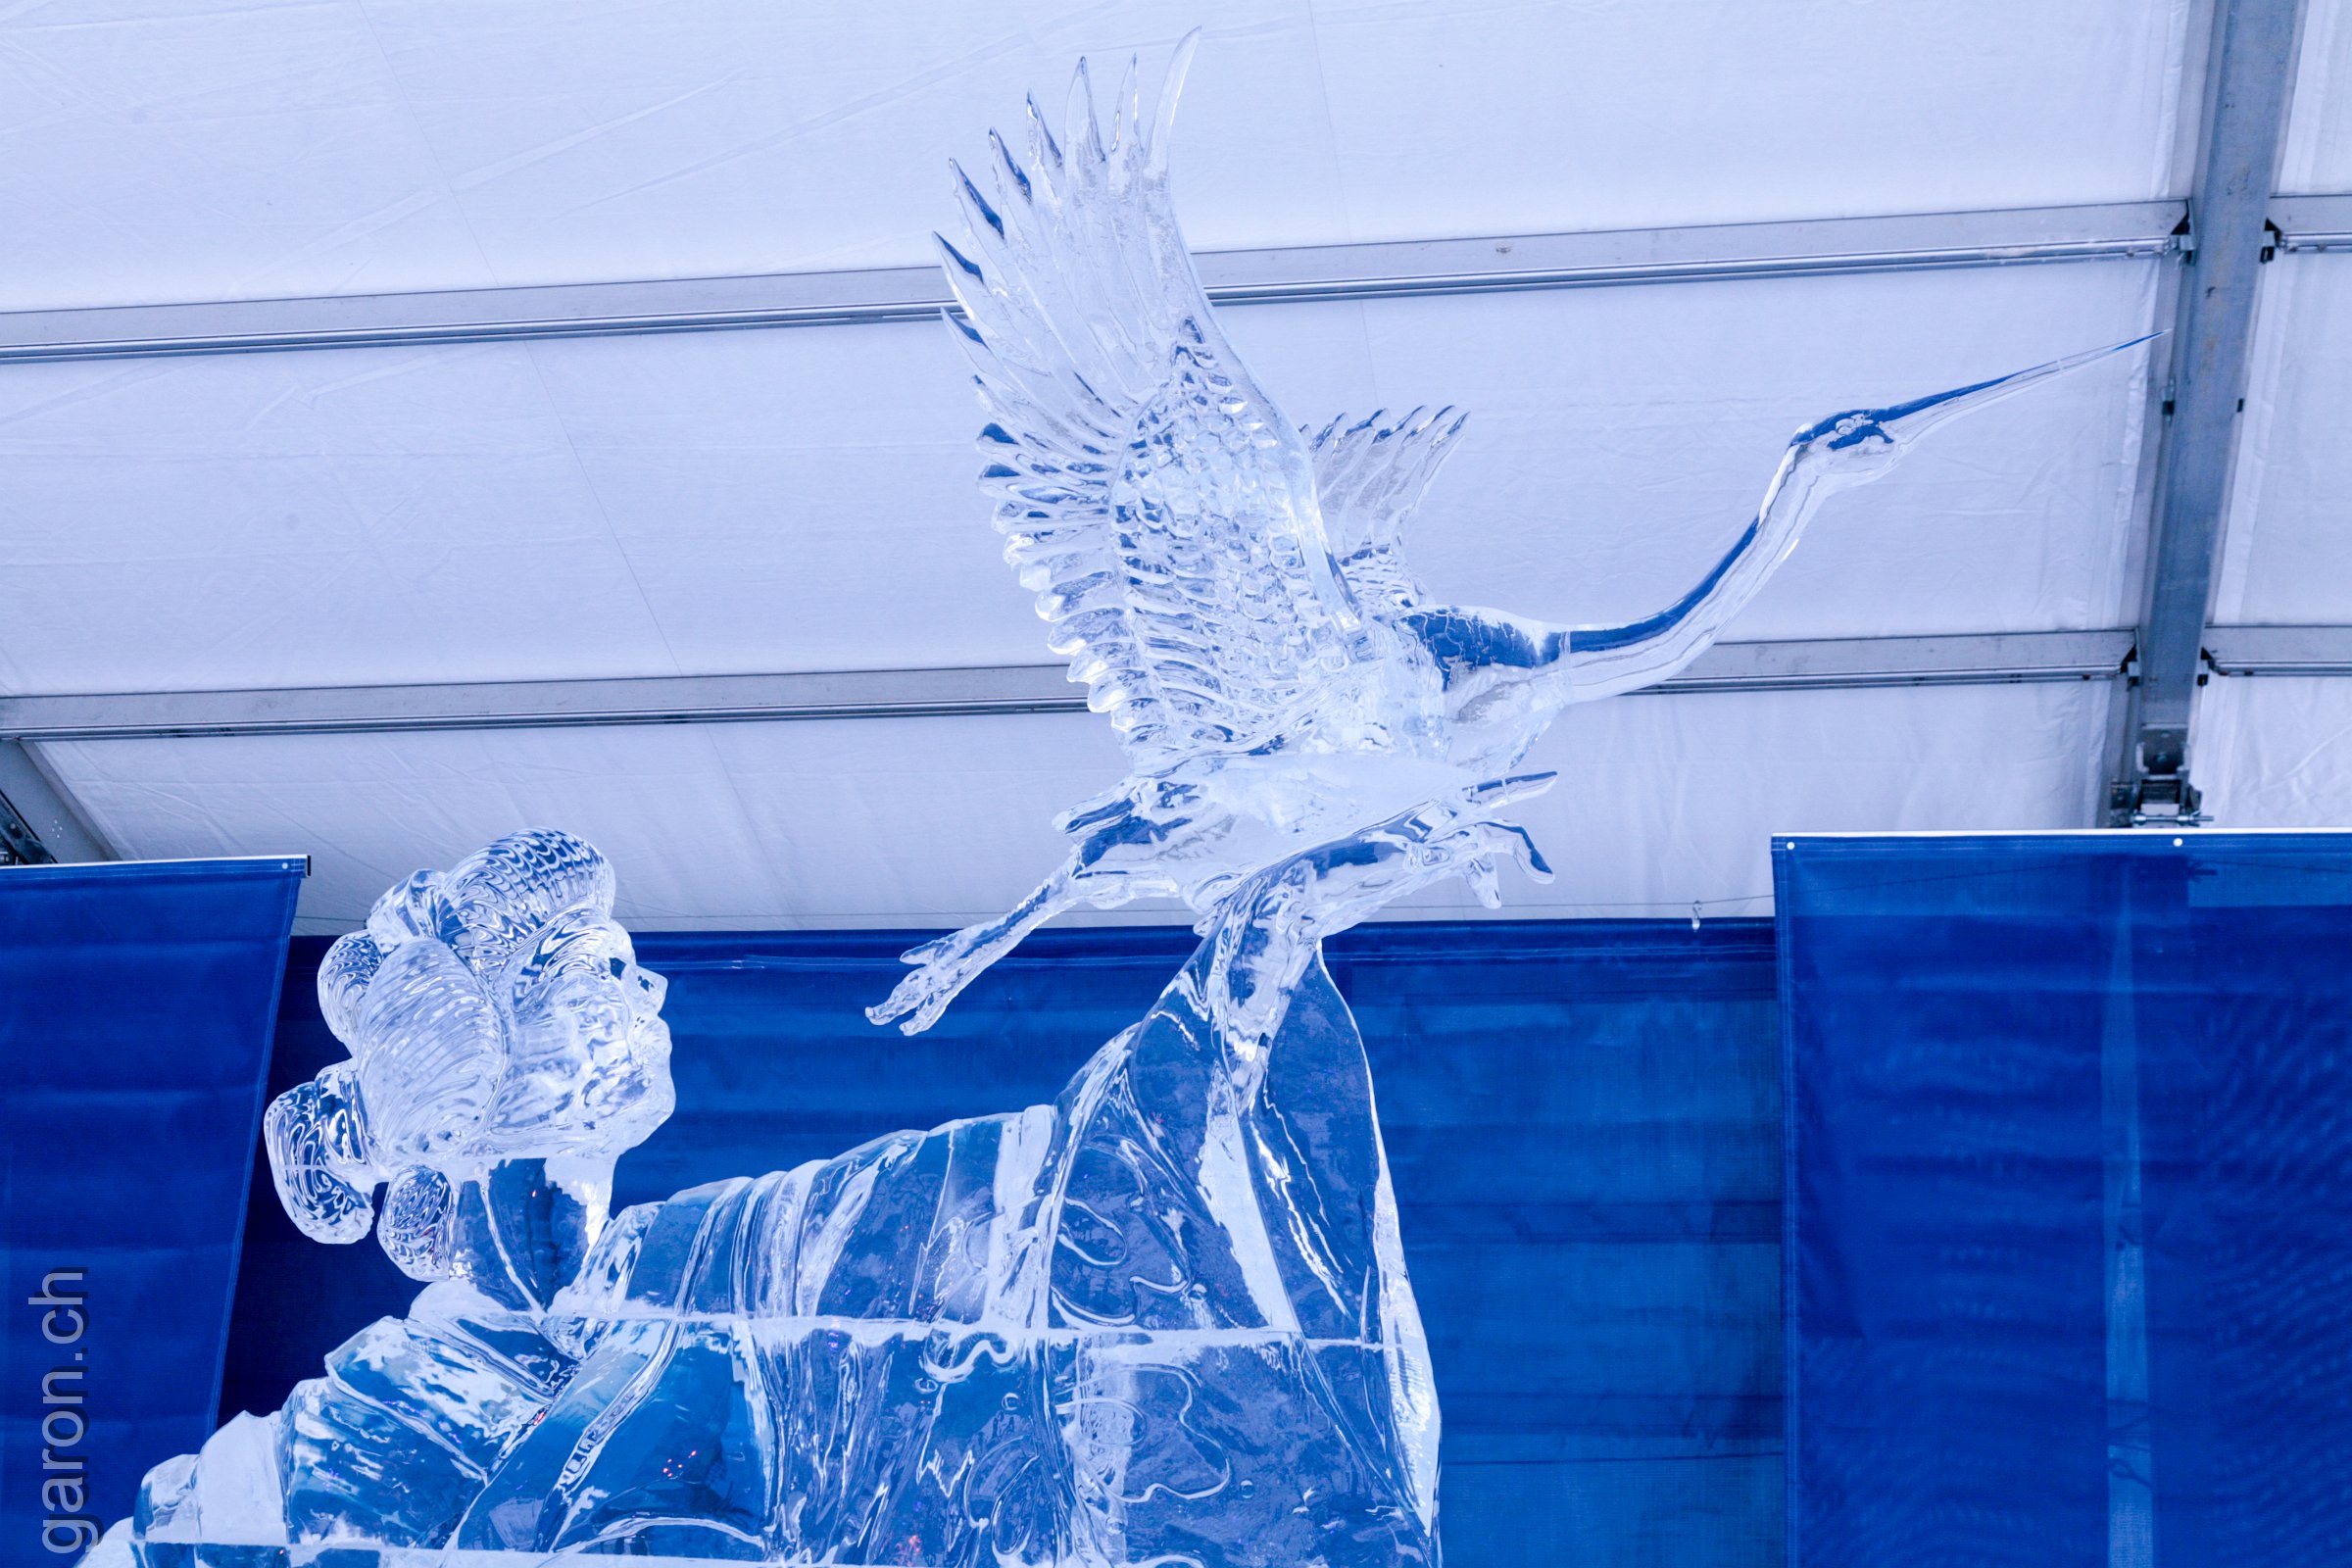 Ice sculptures Ottawa exposed during the exposition Winterlude